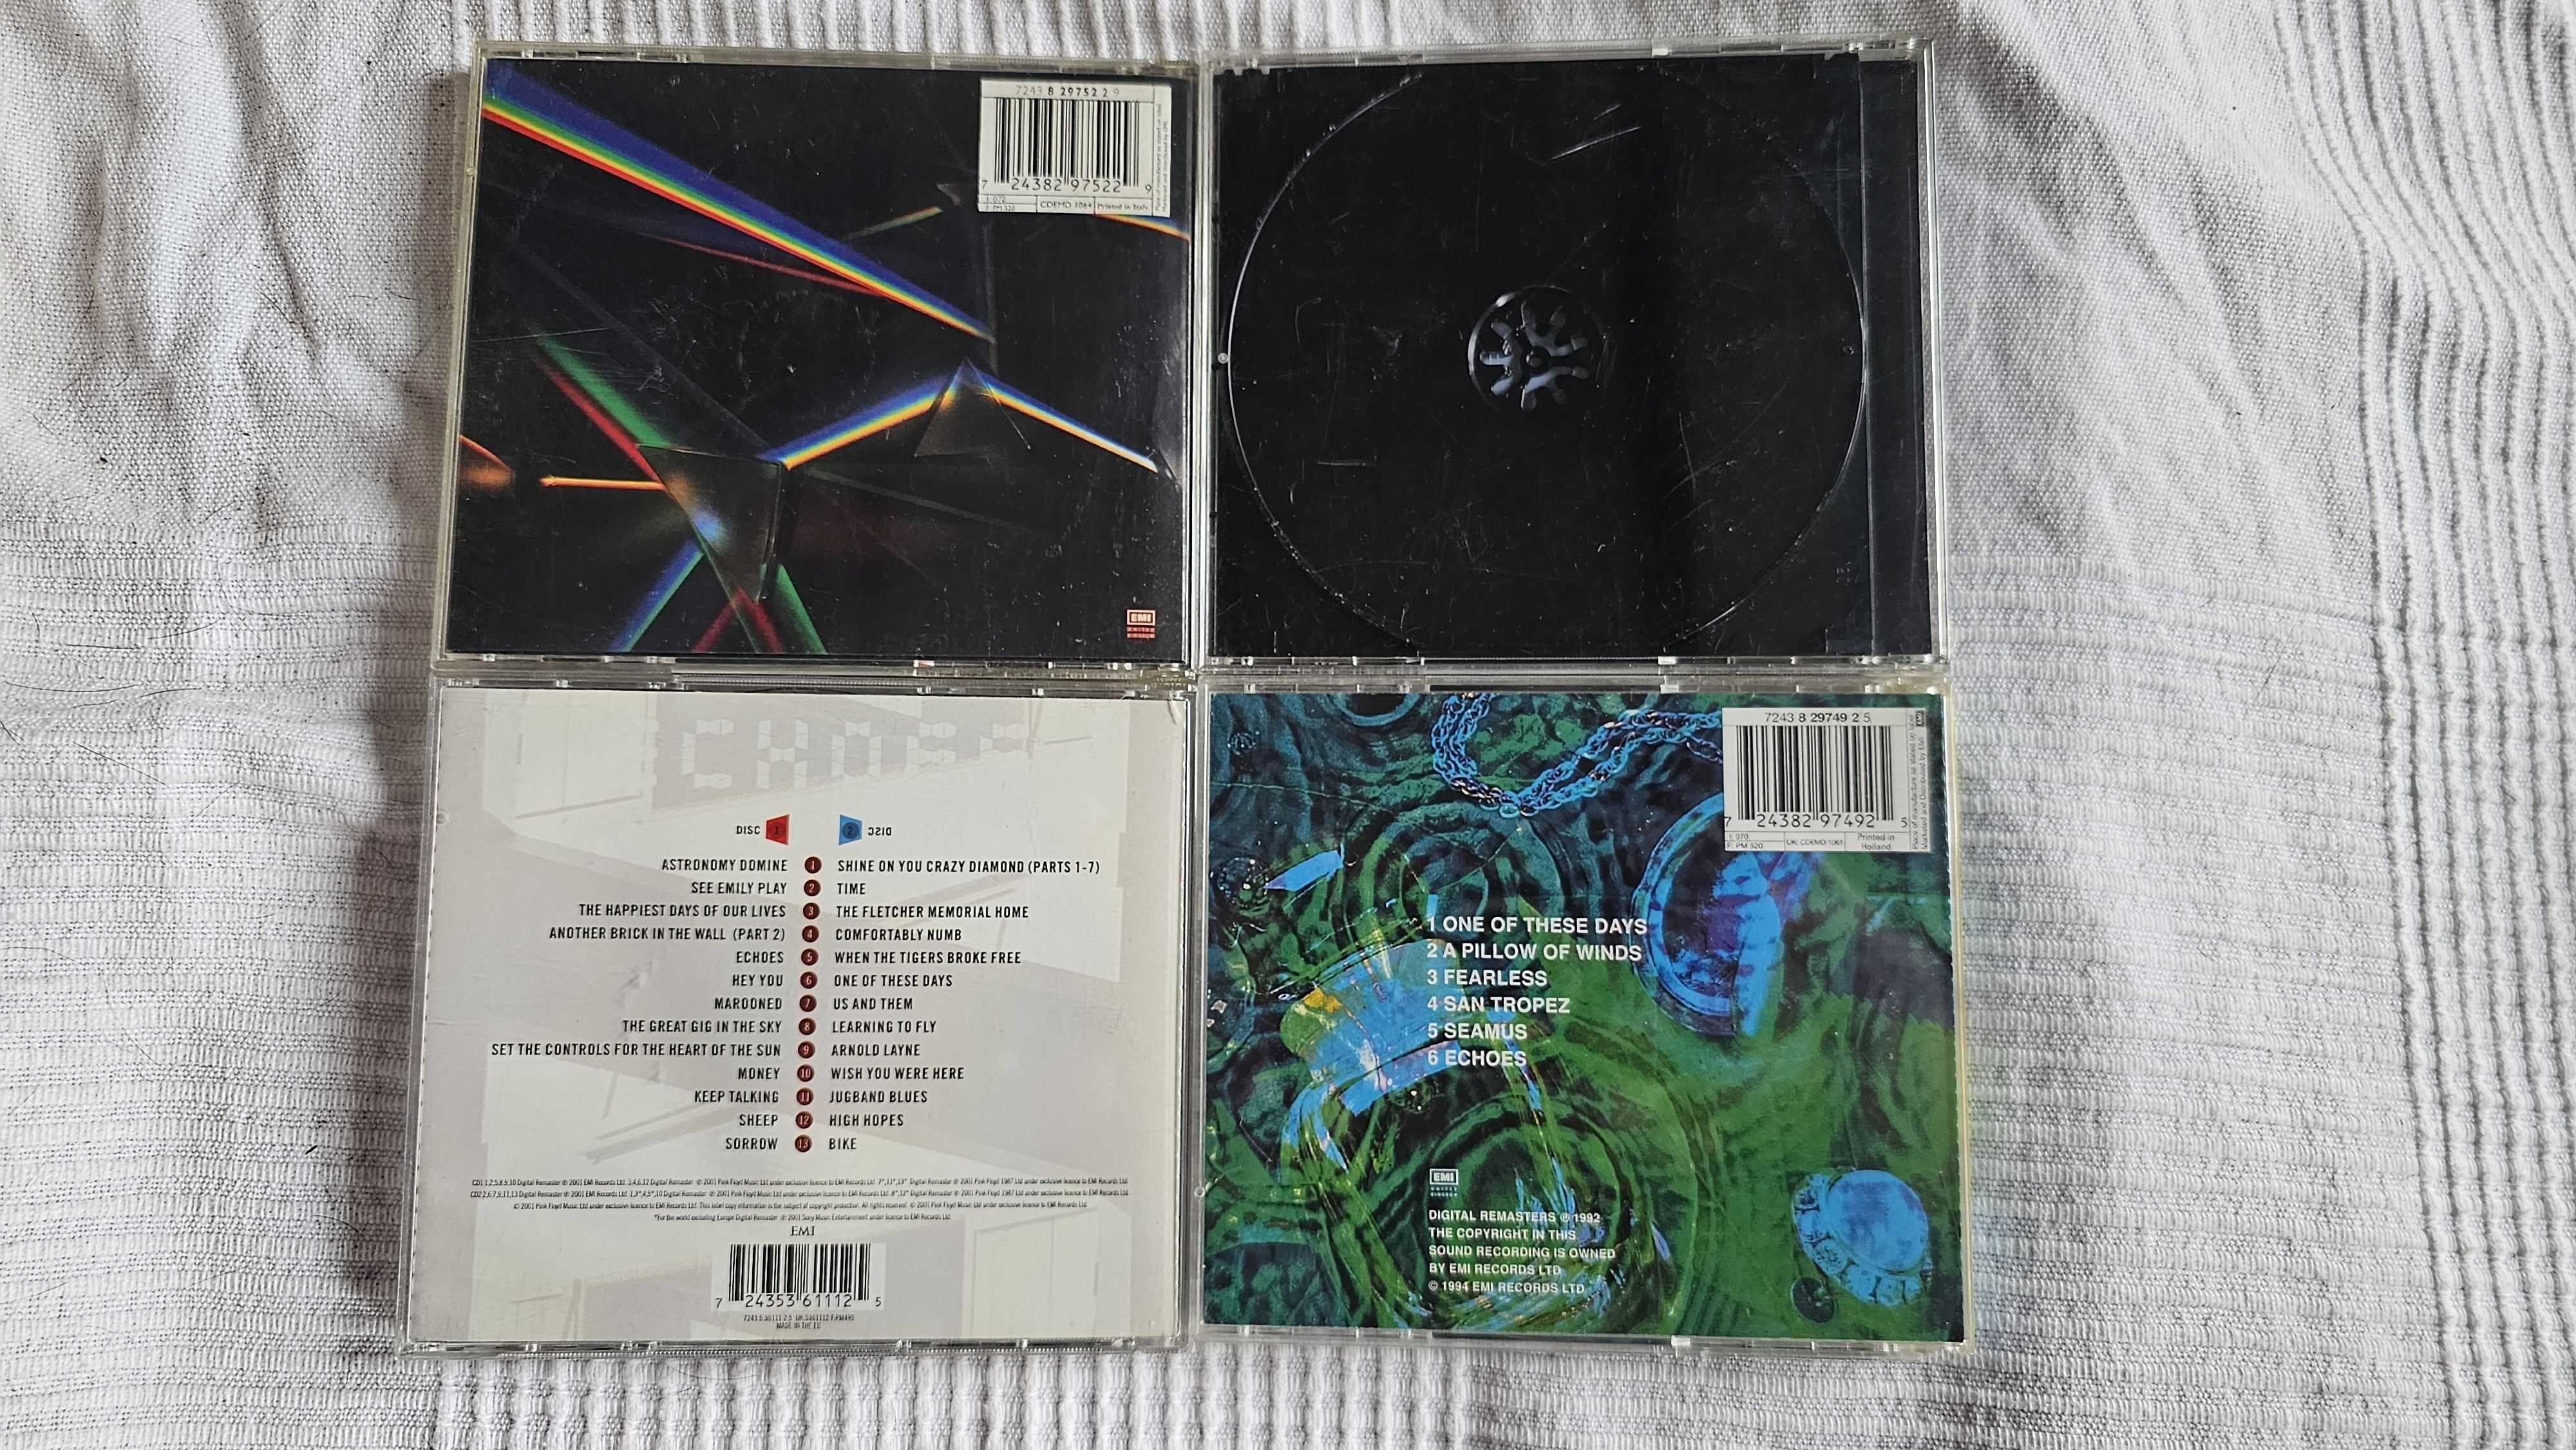 CD 4x PINK FLOYD - Meddle - Echoes - Dark side of the moon - Division